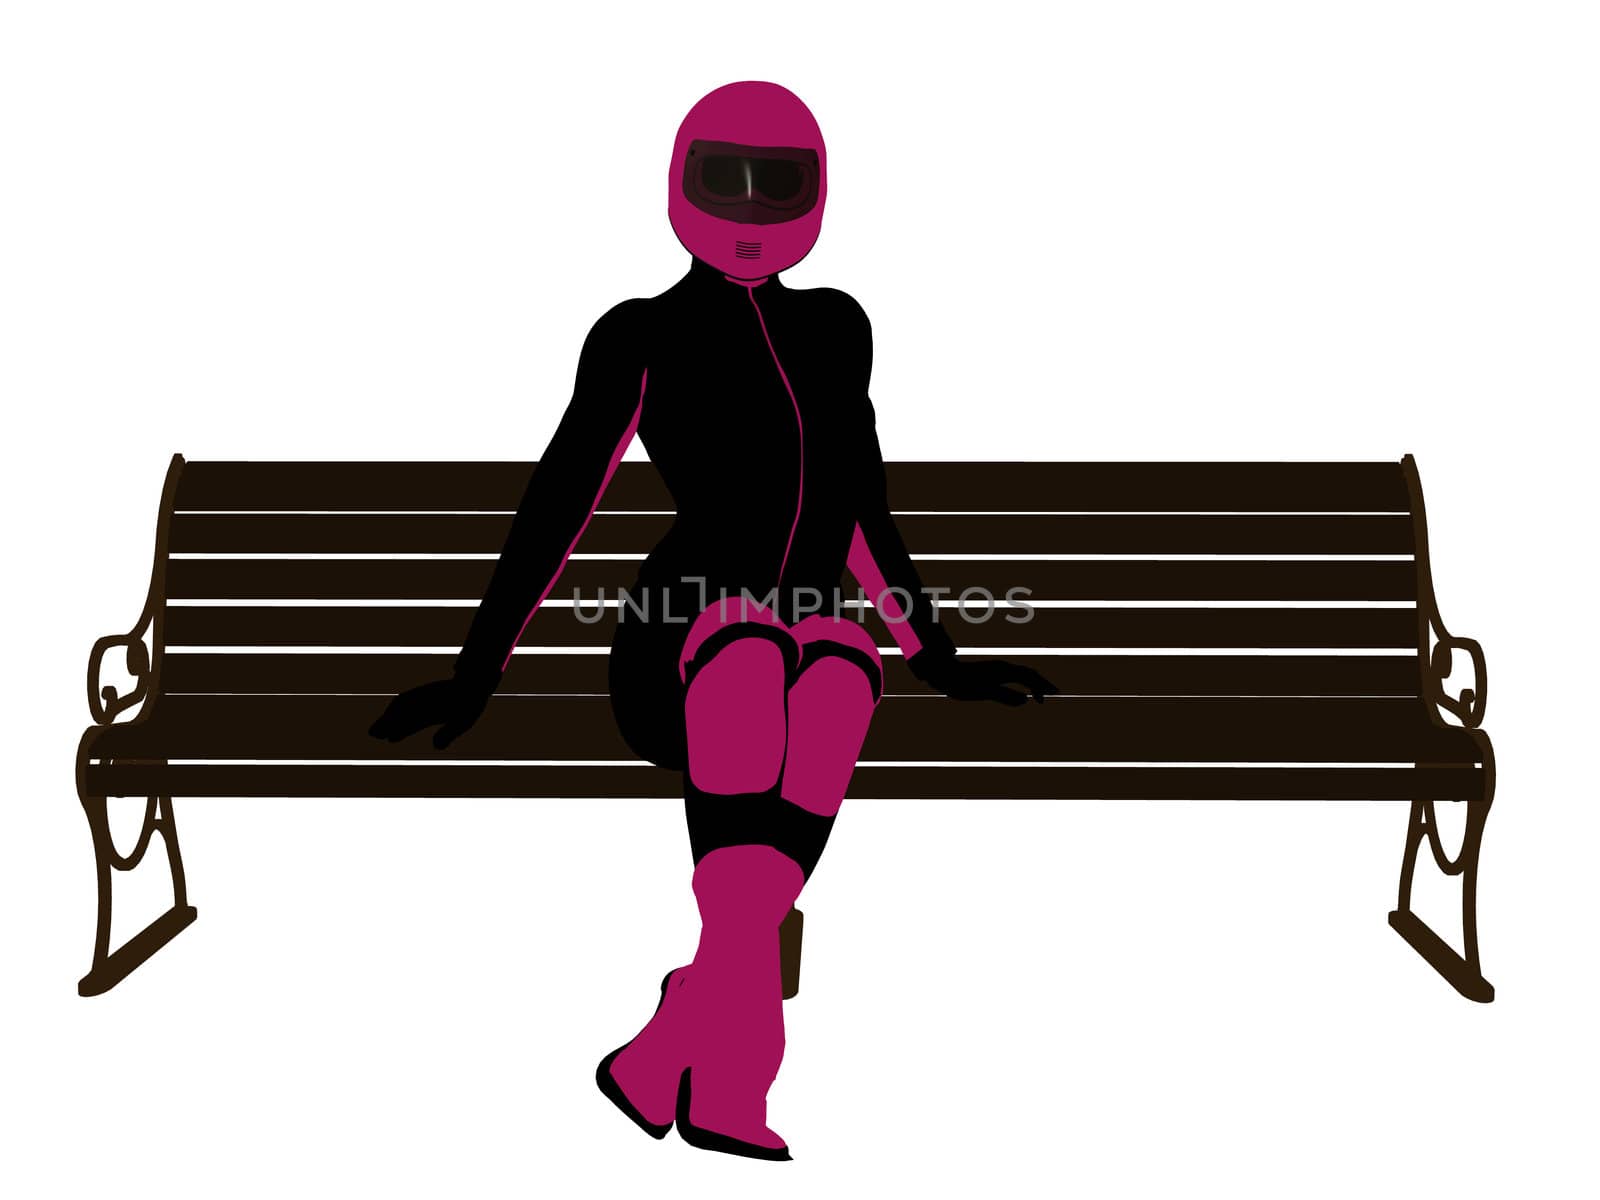 Female Motorcycle Rider sitting on a bench Silhouette by kathygold